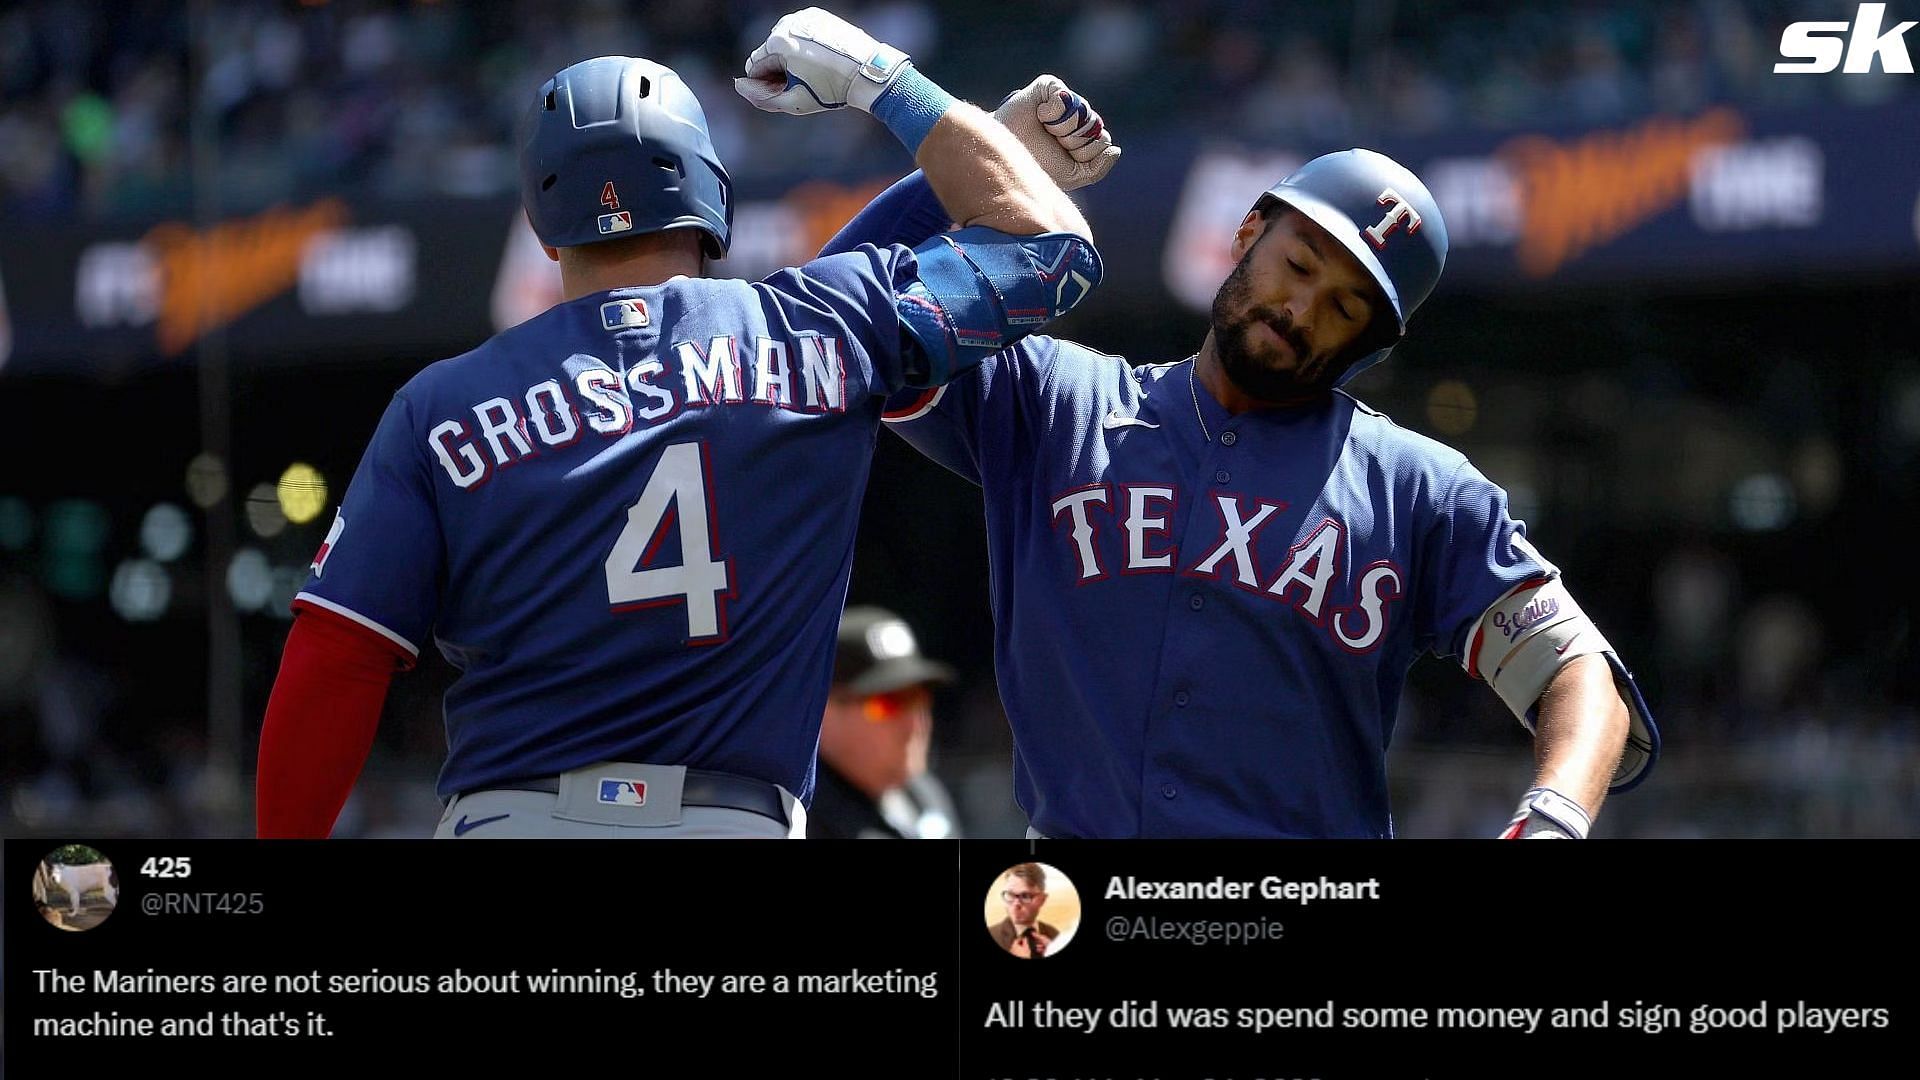 Texas Rangers players celebrate a good play against Seattle Mariners